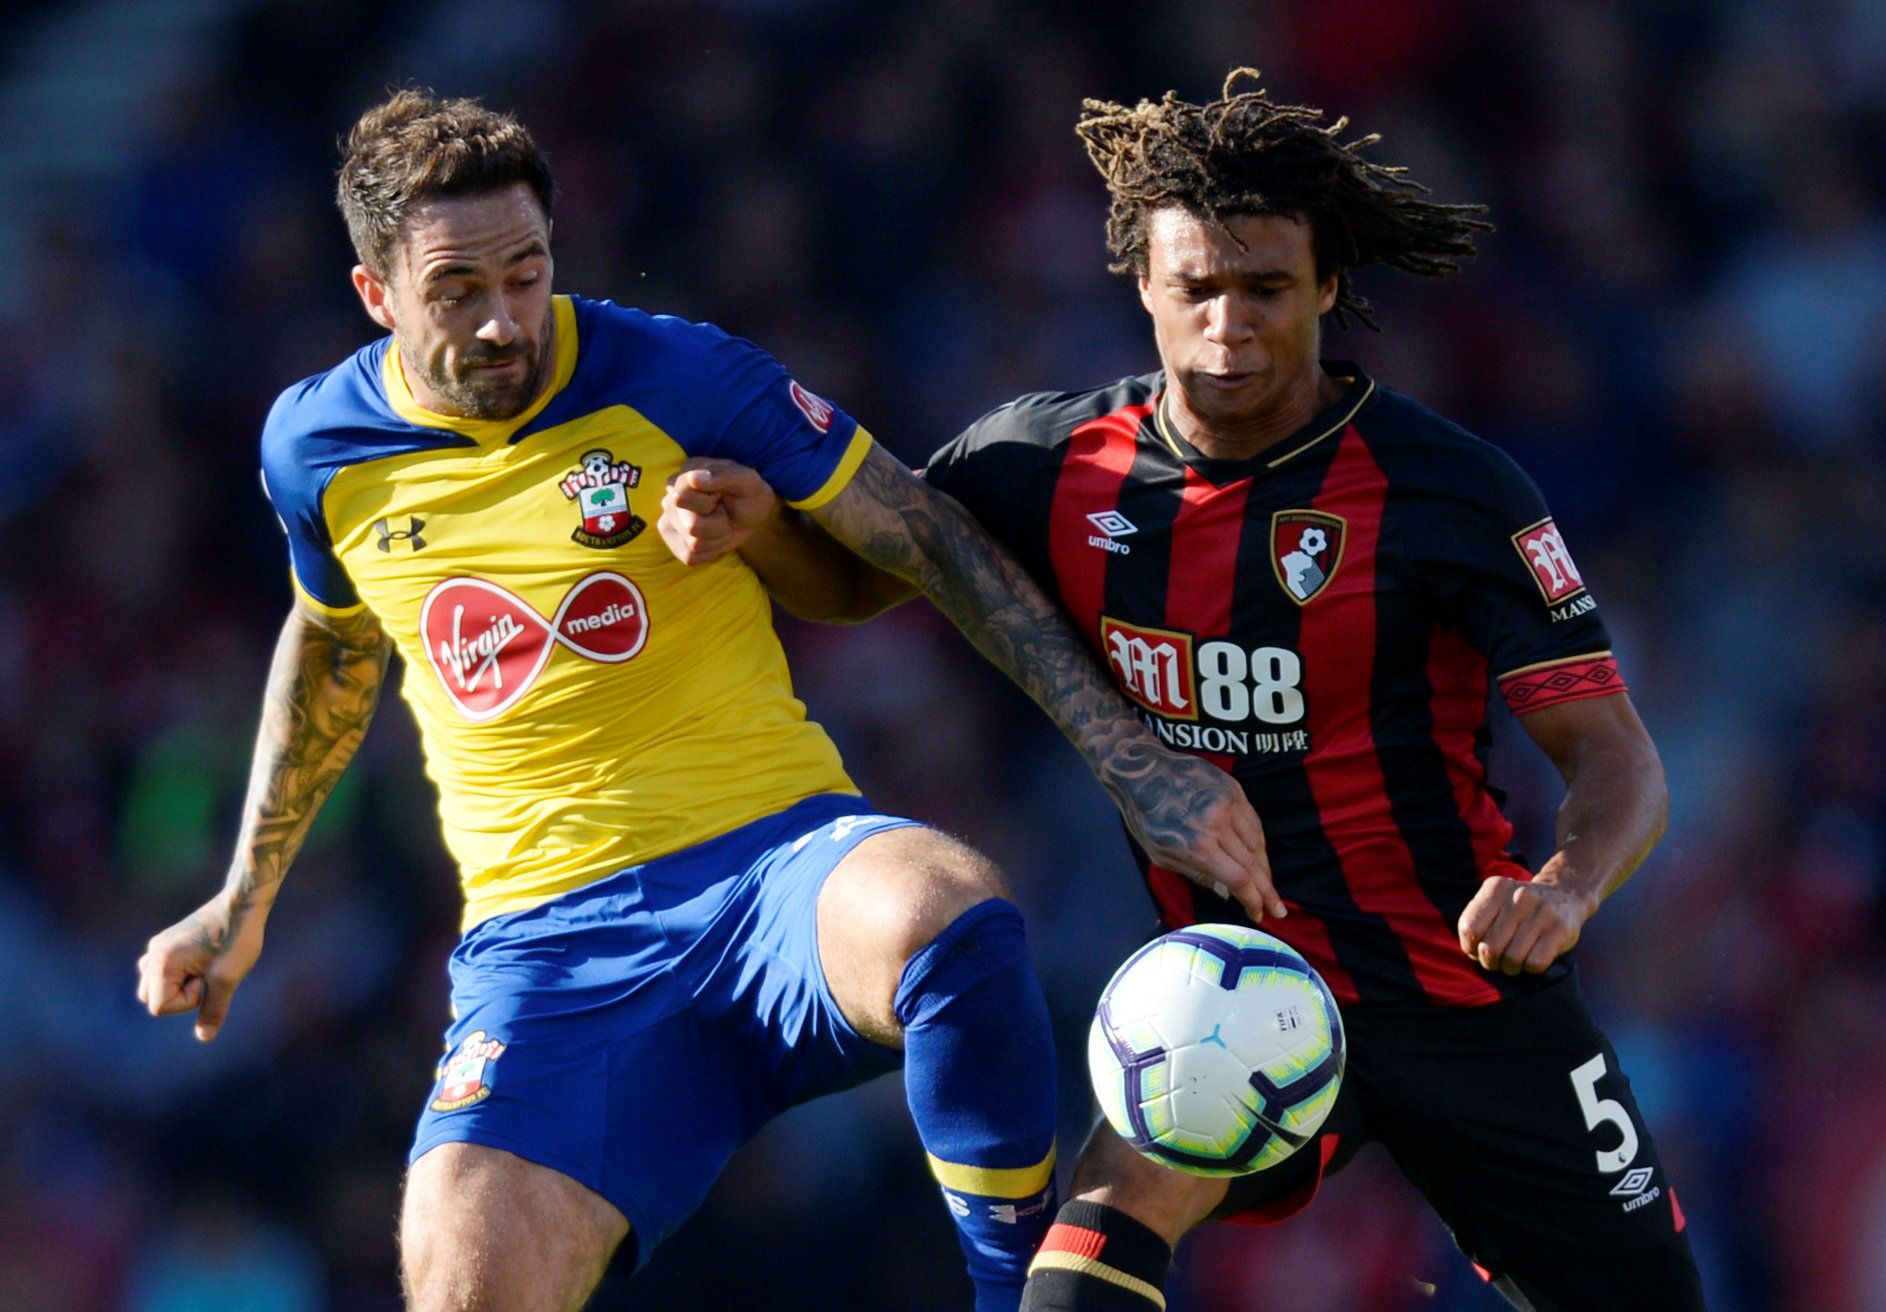 Soccer Football - Premier League - AFC Bournemouth v Southampton - Vitality Stadium, Bournemouth, Britain - October 20, 2018  Bournemouth's Nathan Ake in action with Southampton's Danny Ings   Action Images via Reuters/Adam Holt  EDITORIAL USE ONLY. No use with unauthorized audio, video, data, fixture lists, club/league logos or 